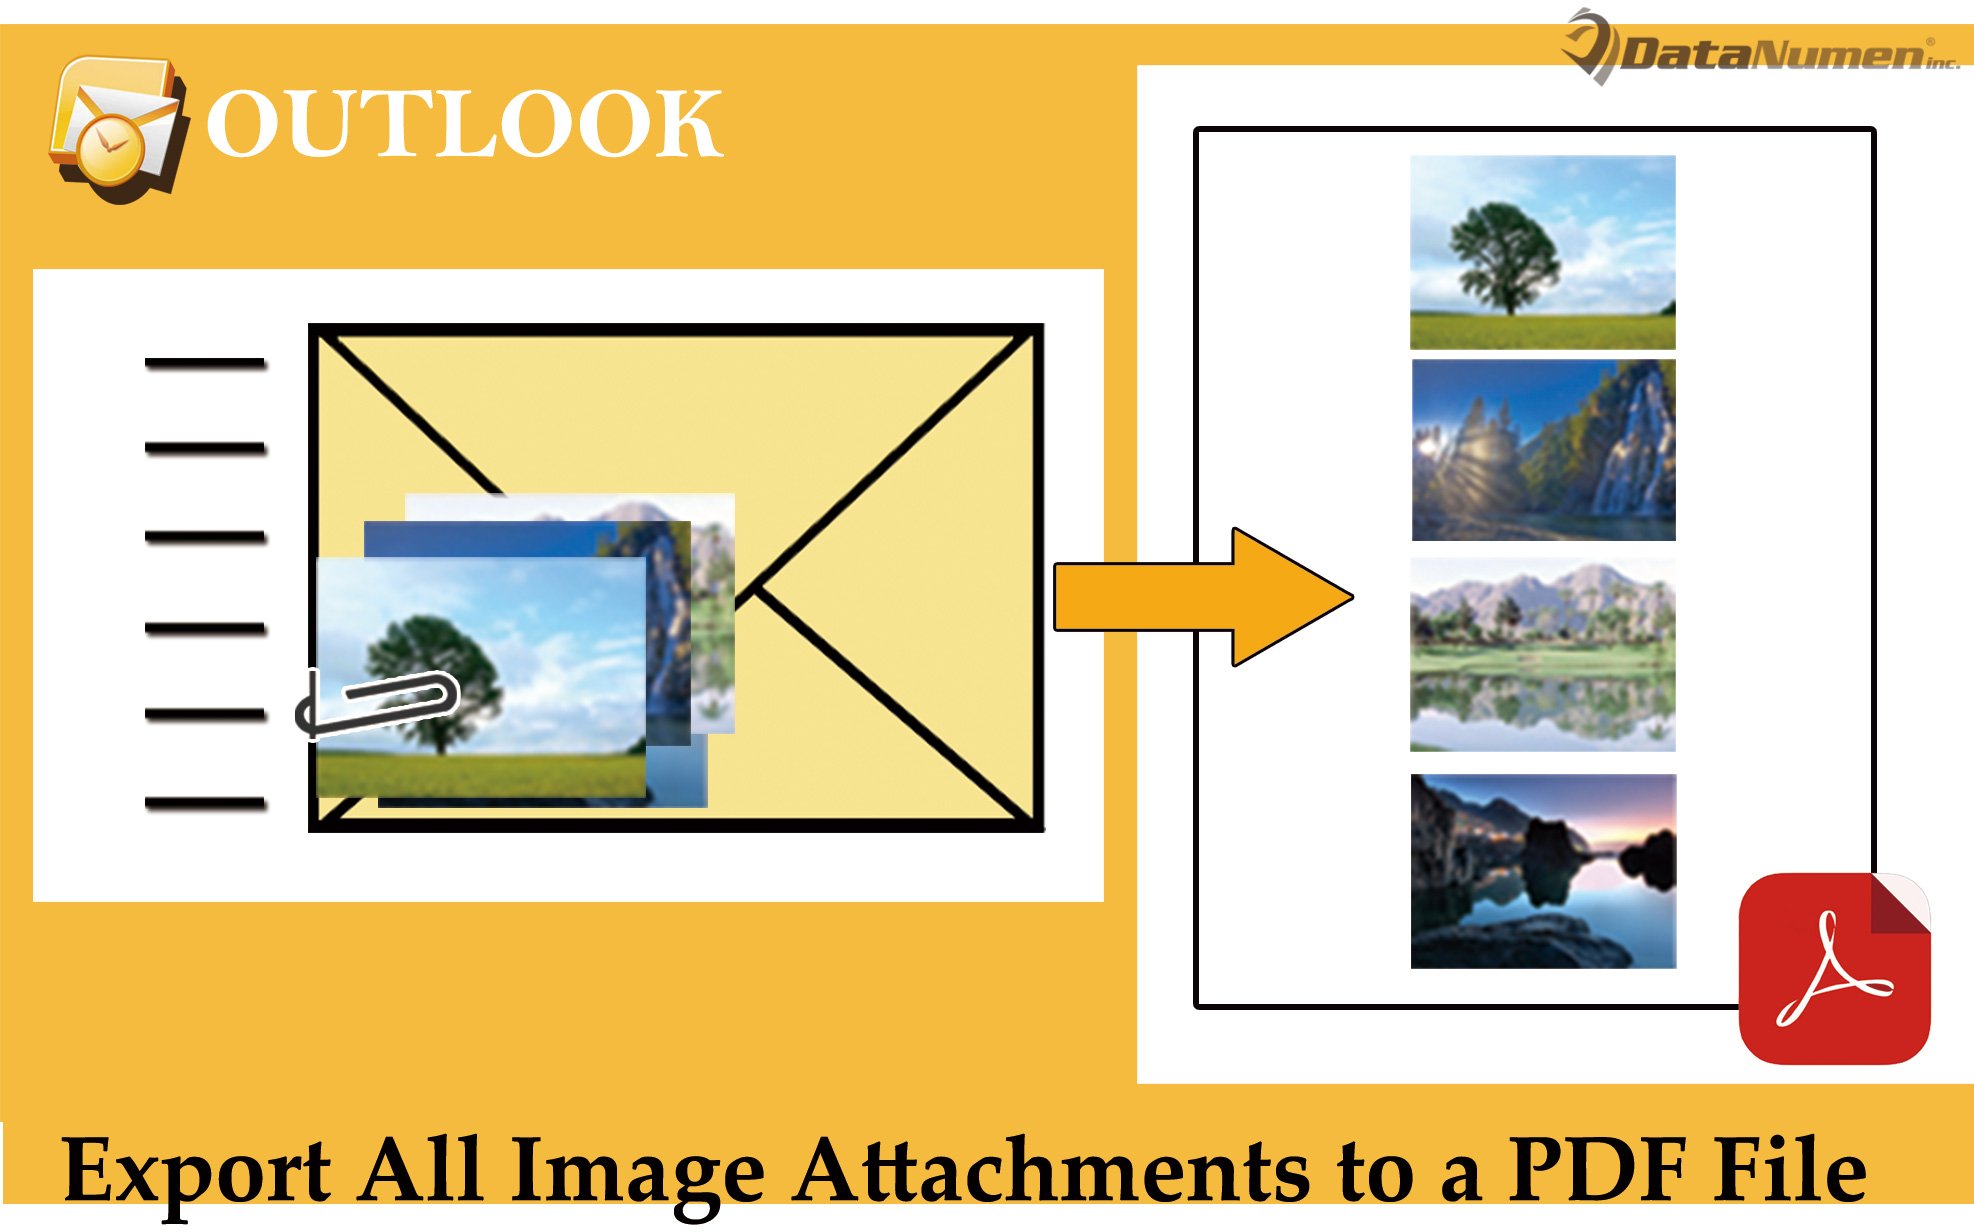 Quickly Export All Image Attachments of an Outlook Email to a PDF File